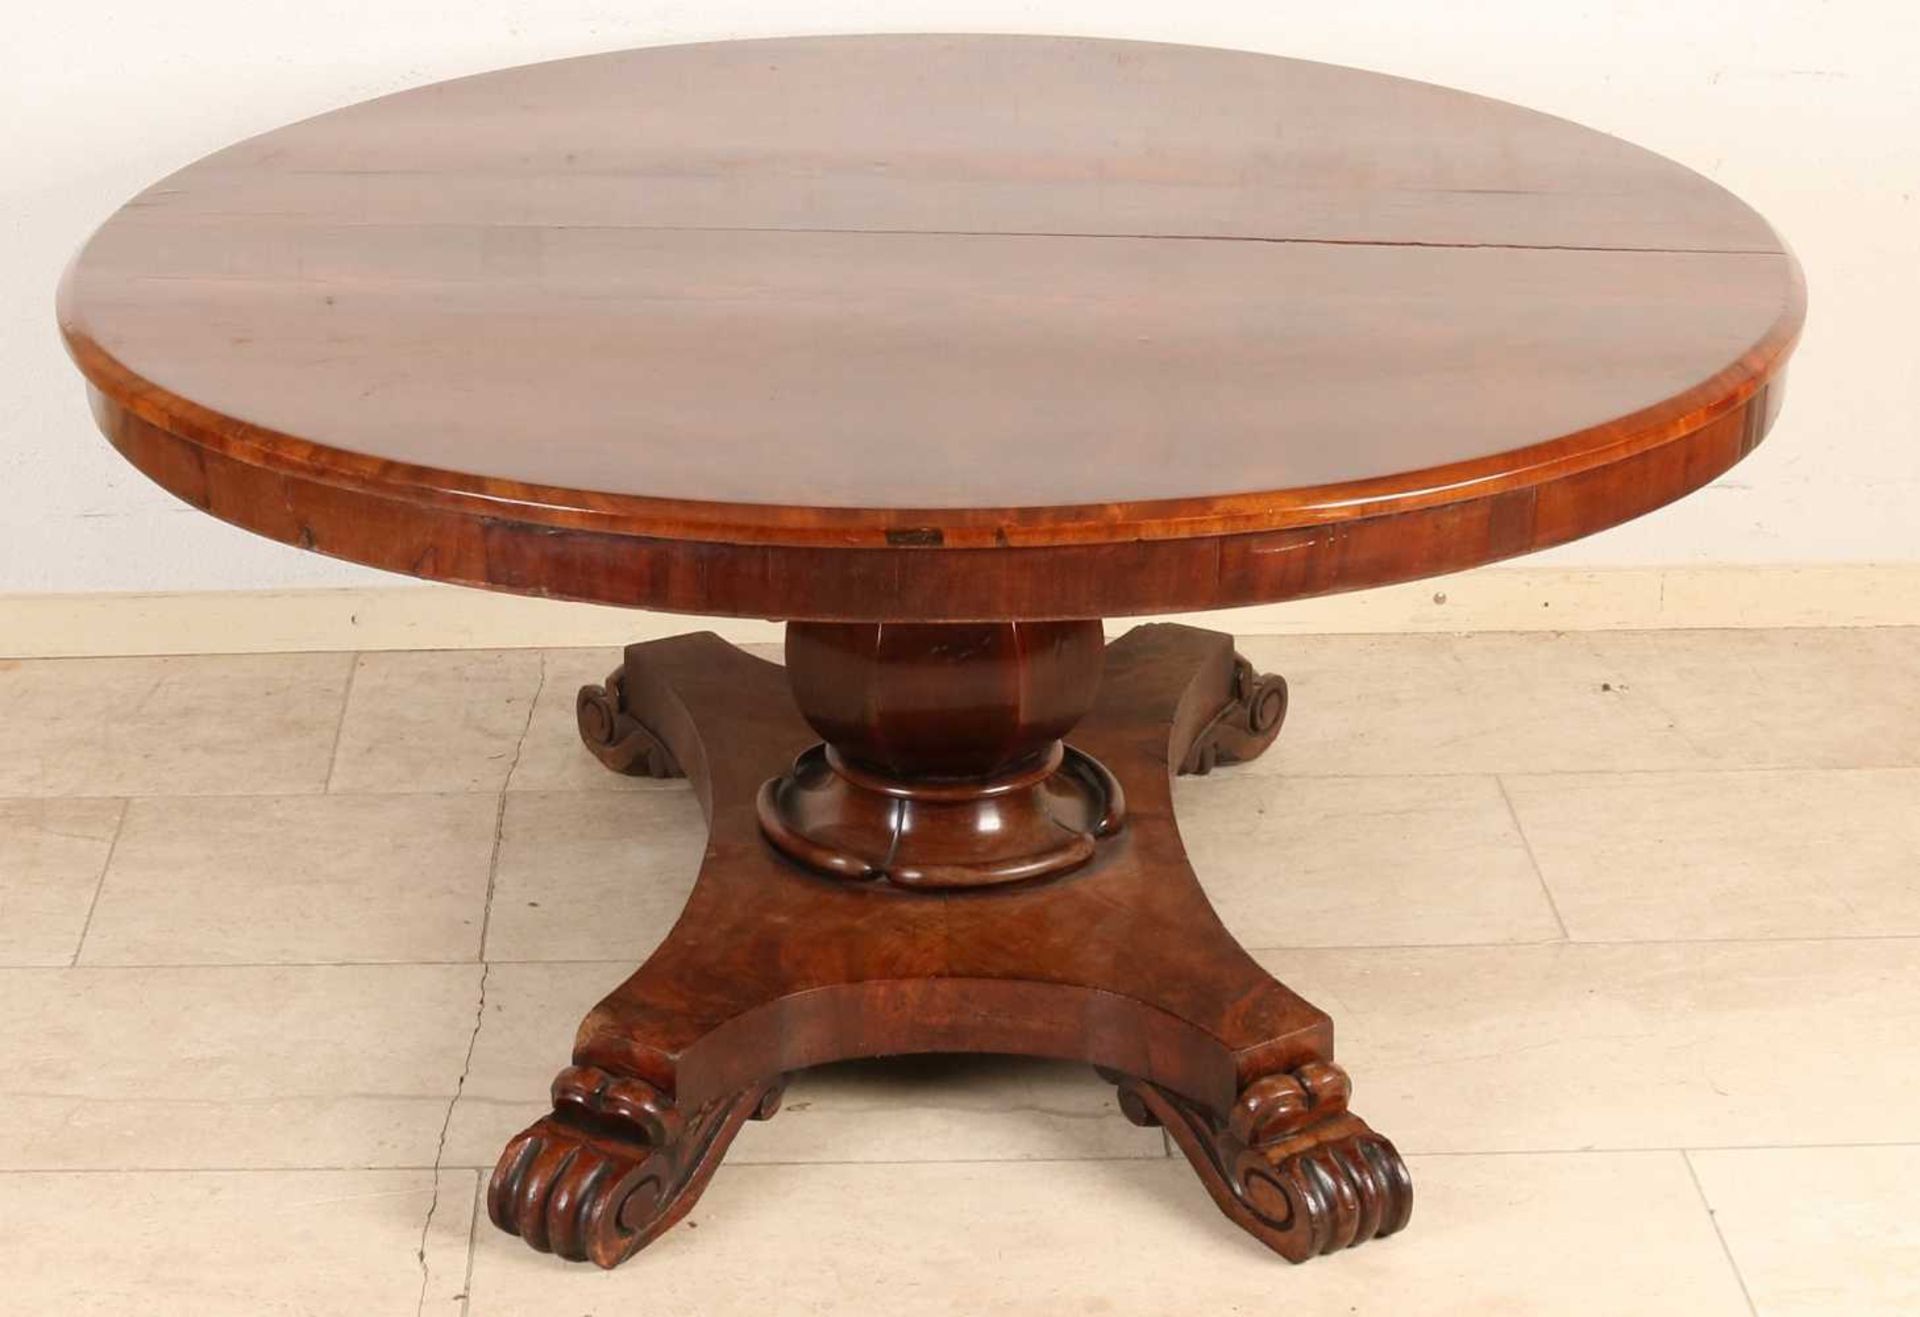 Antique Dutch table with four spans claw feet. 19th century. Size: 57 x 104 cm. In good condition.